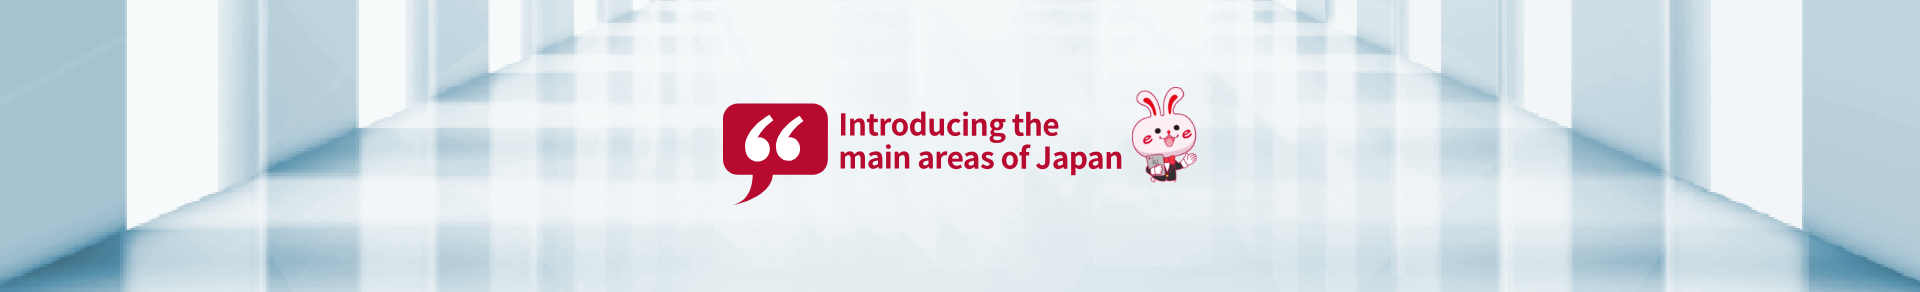 Introducing the main areas of Japan